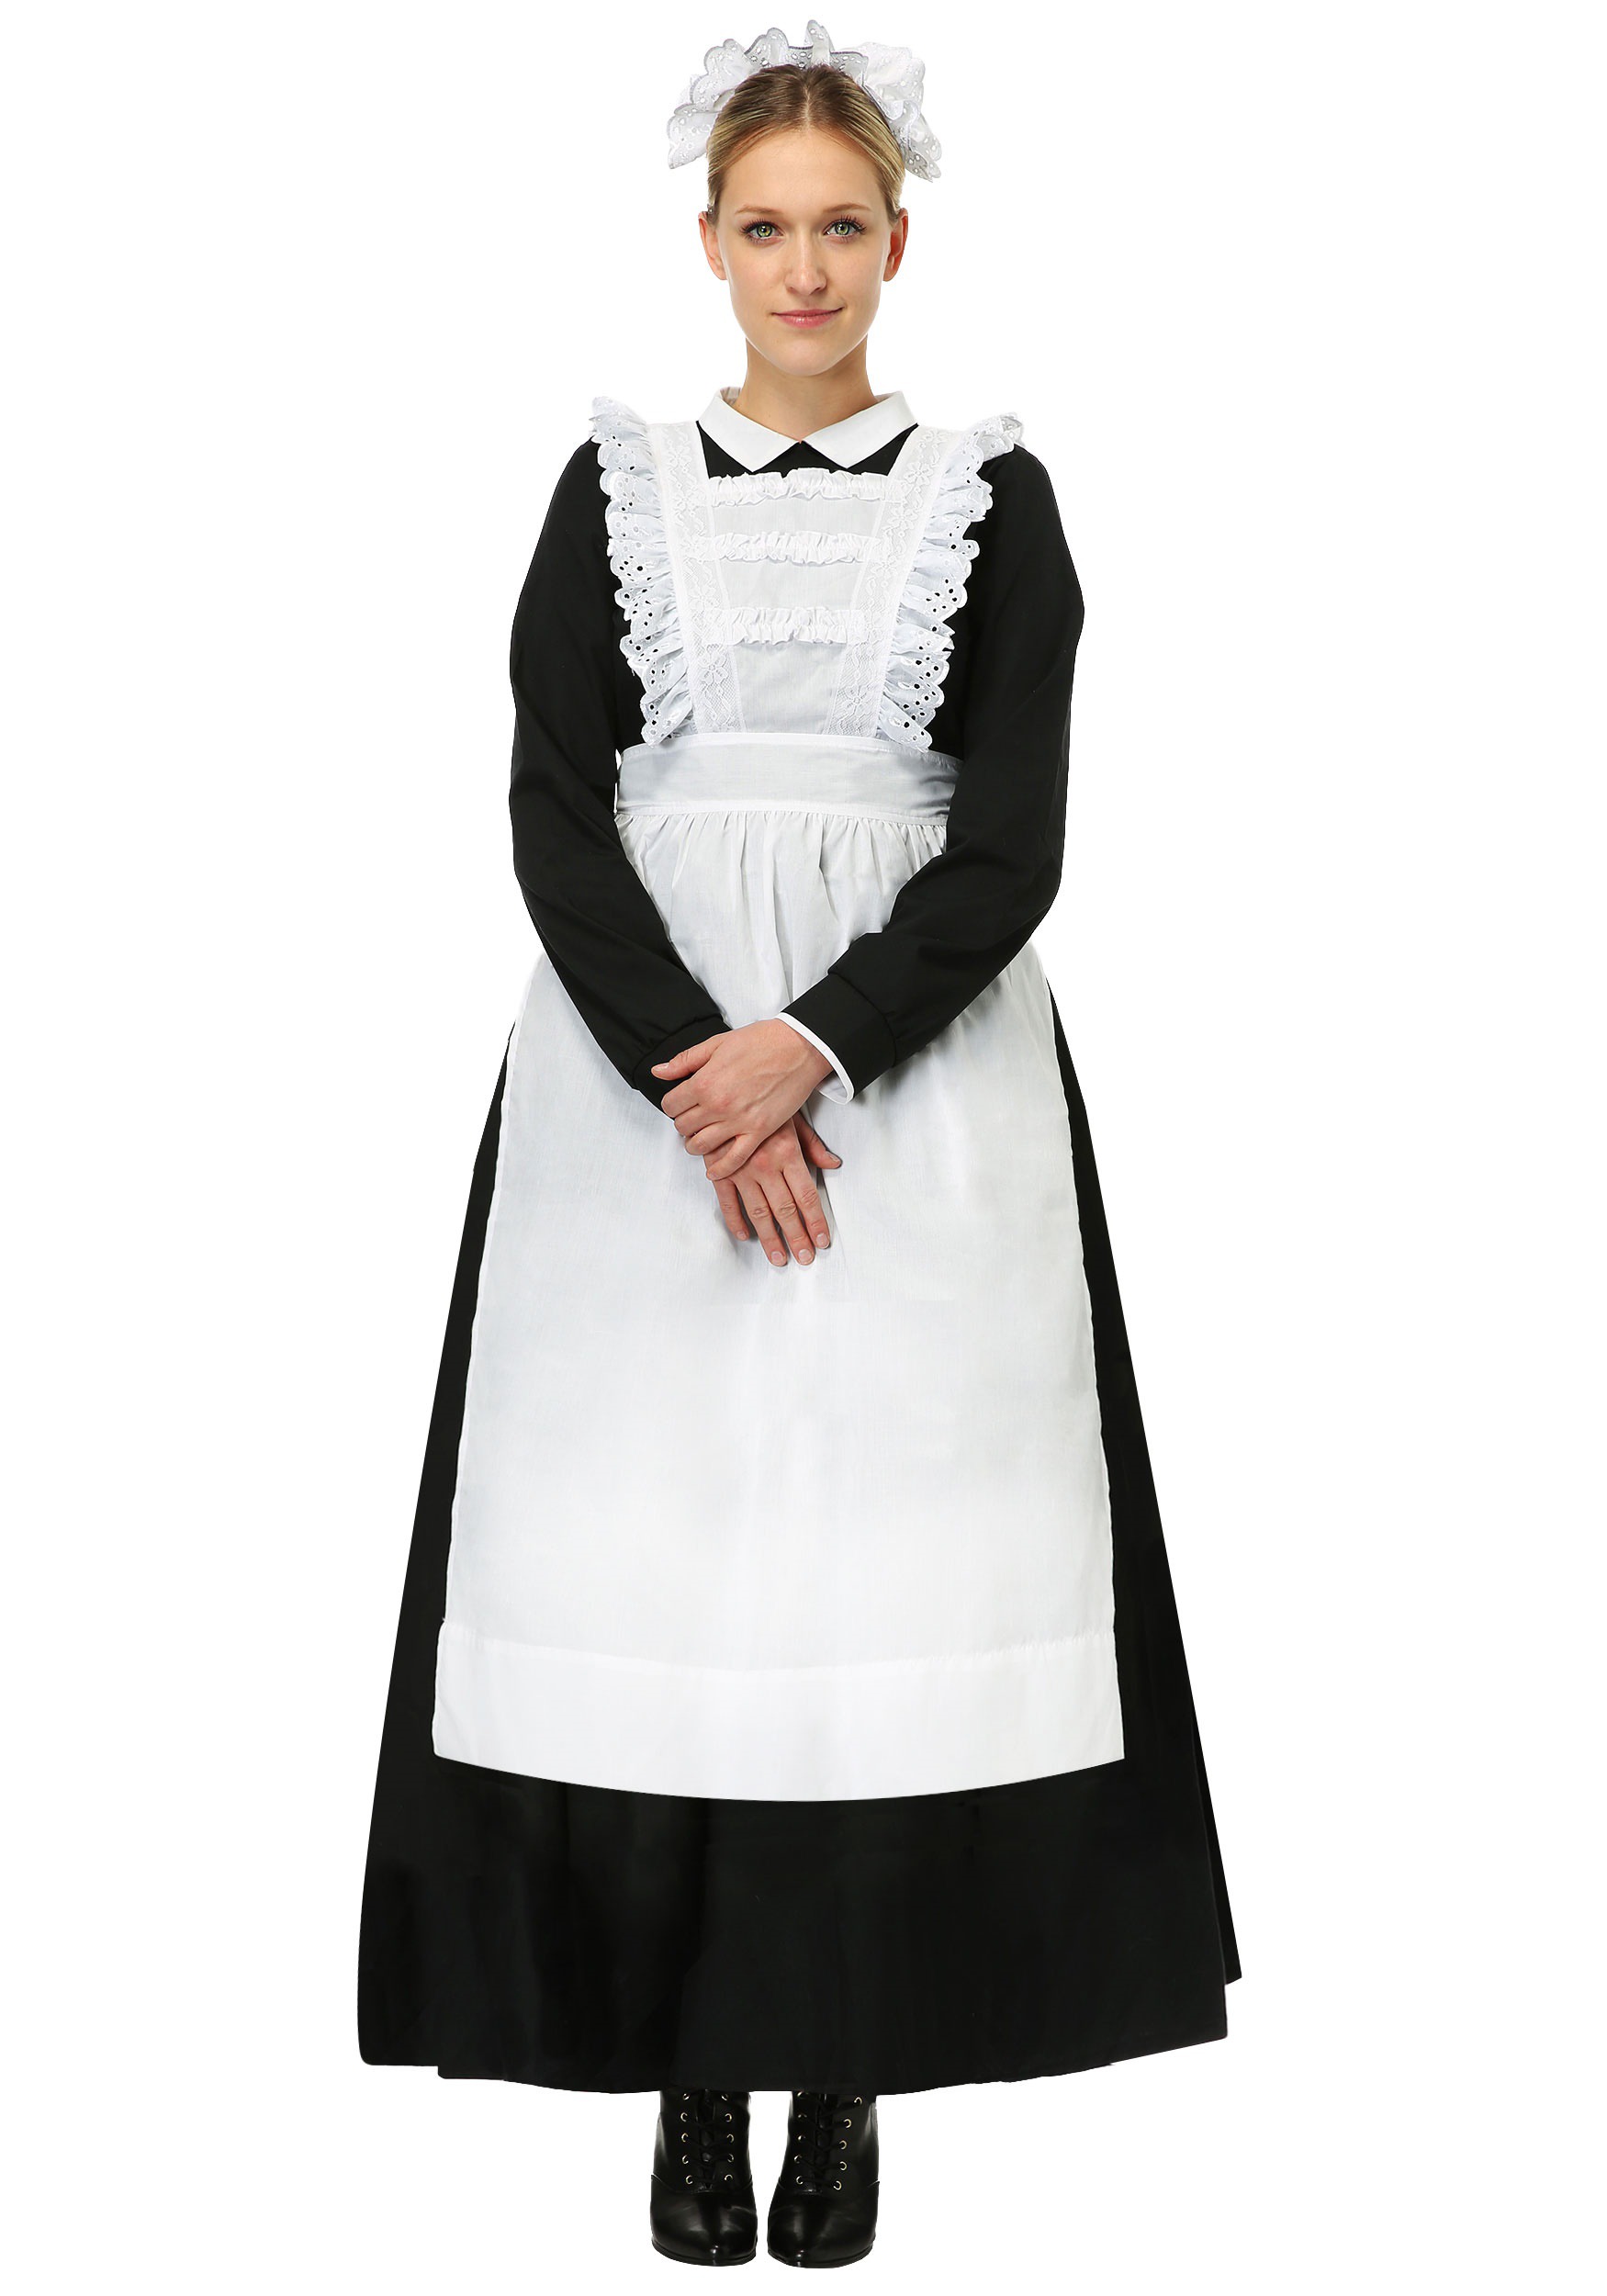 Image of Traditional Maid Costume for Women ID FUN1520AD-XS